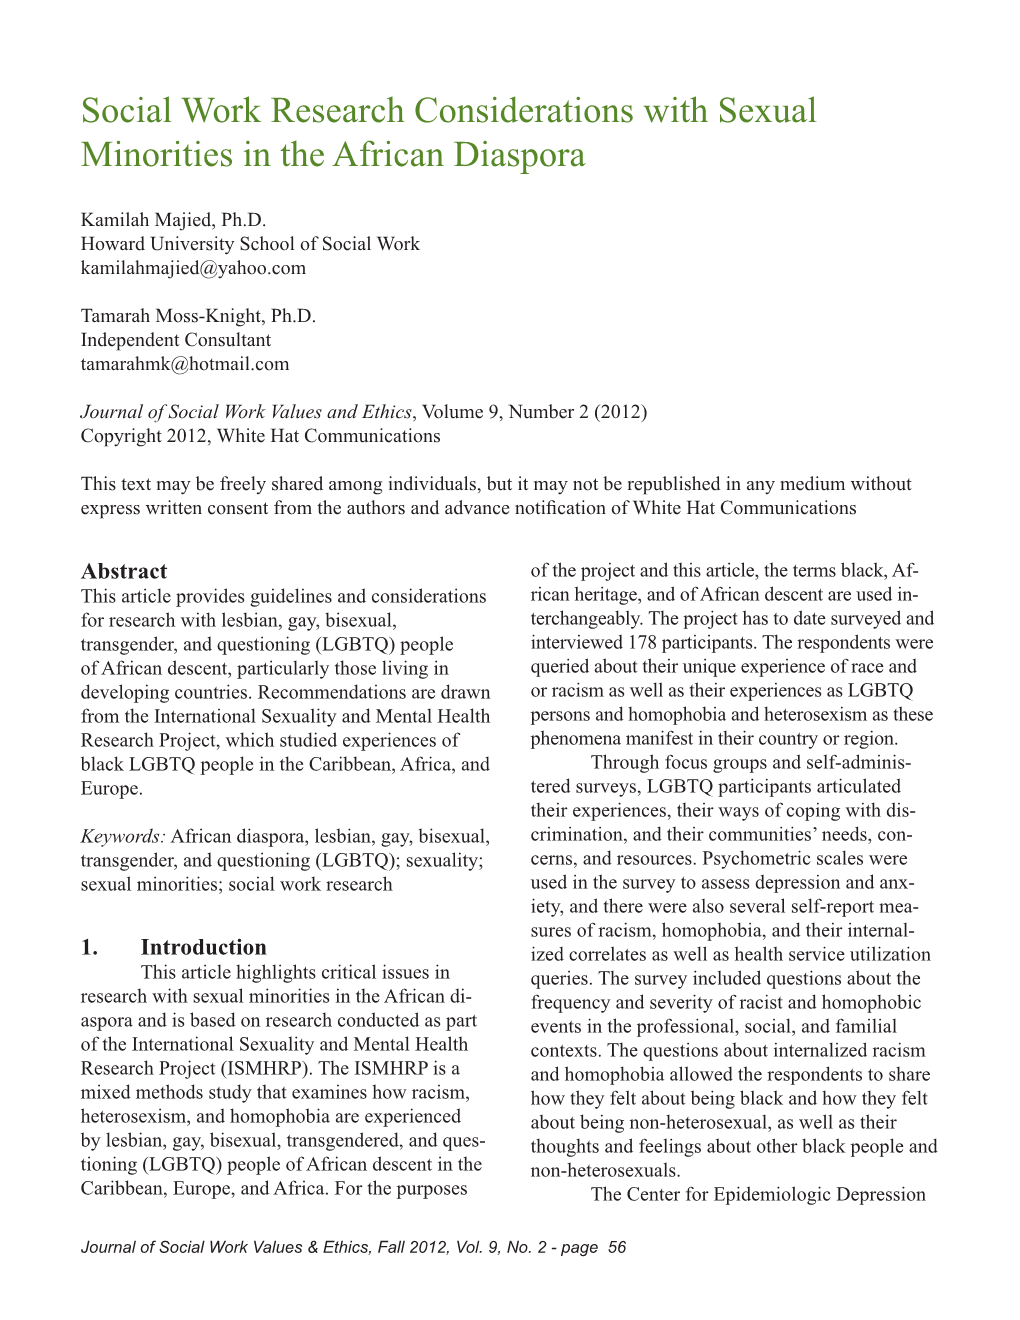 Social Work Research Considerations with Sexual Minorities in the African Diaspora